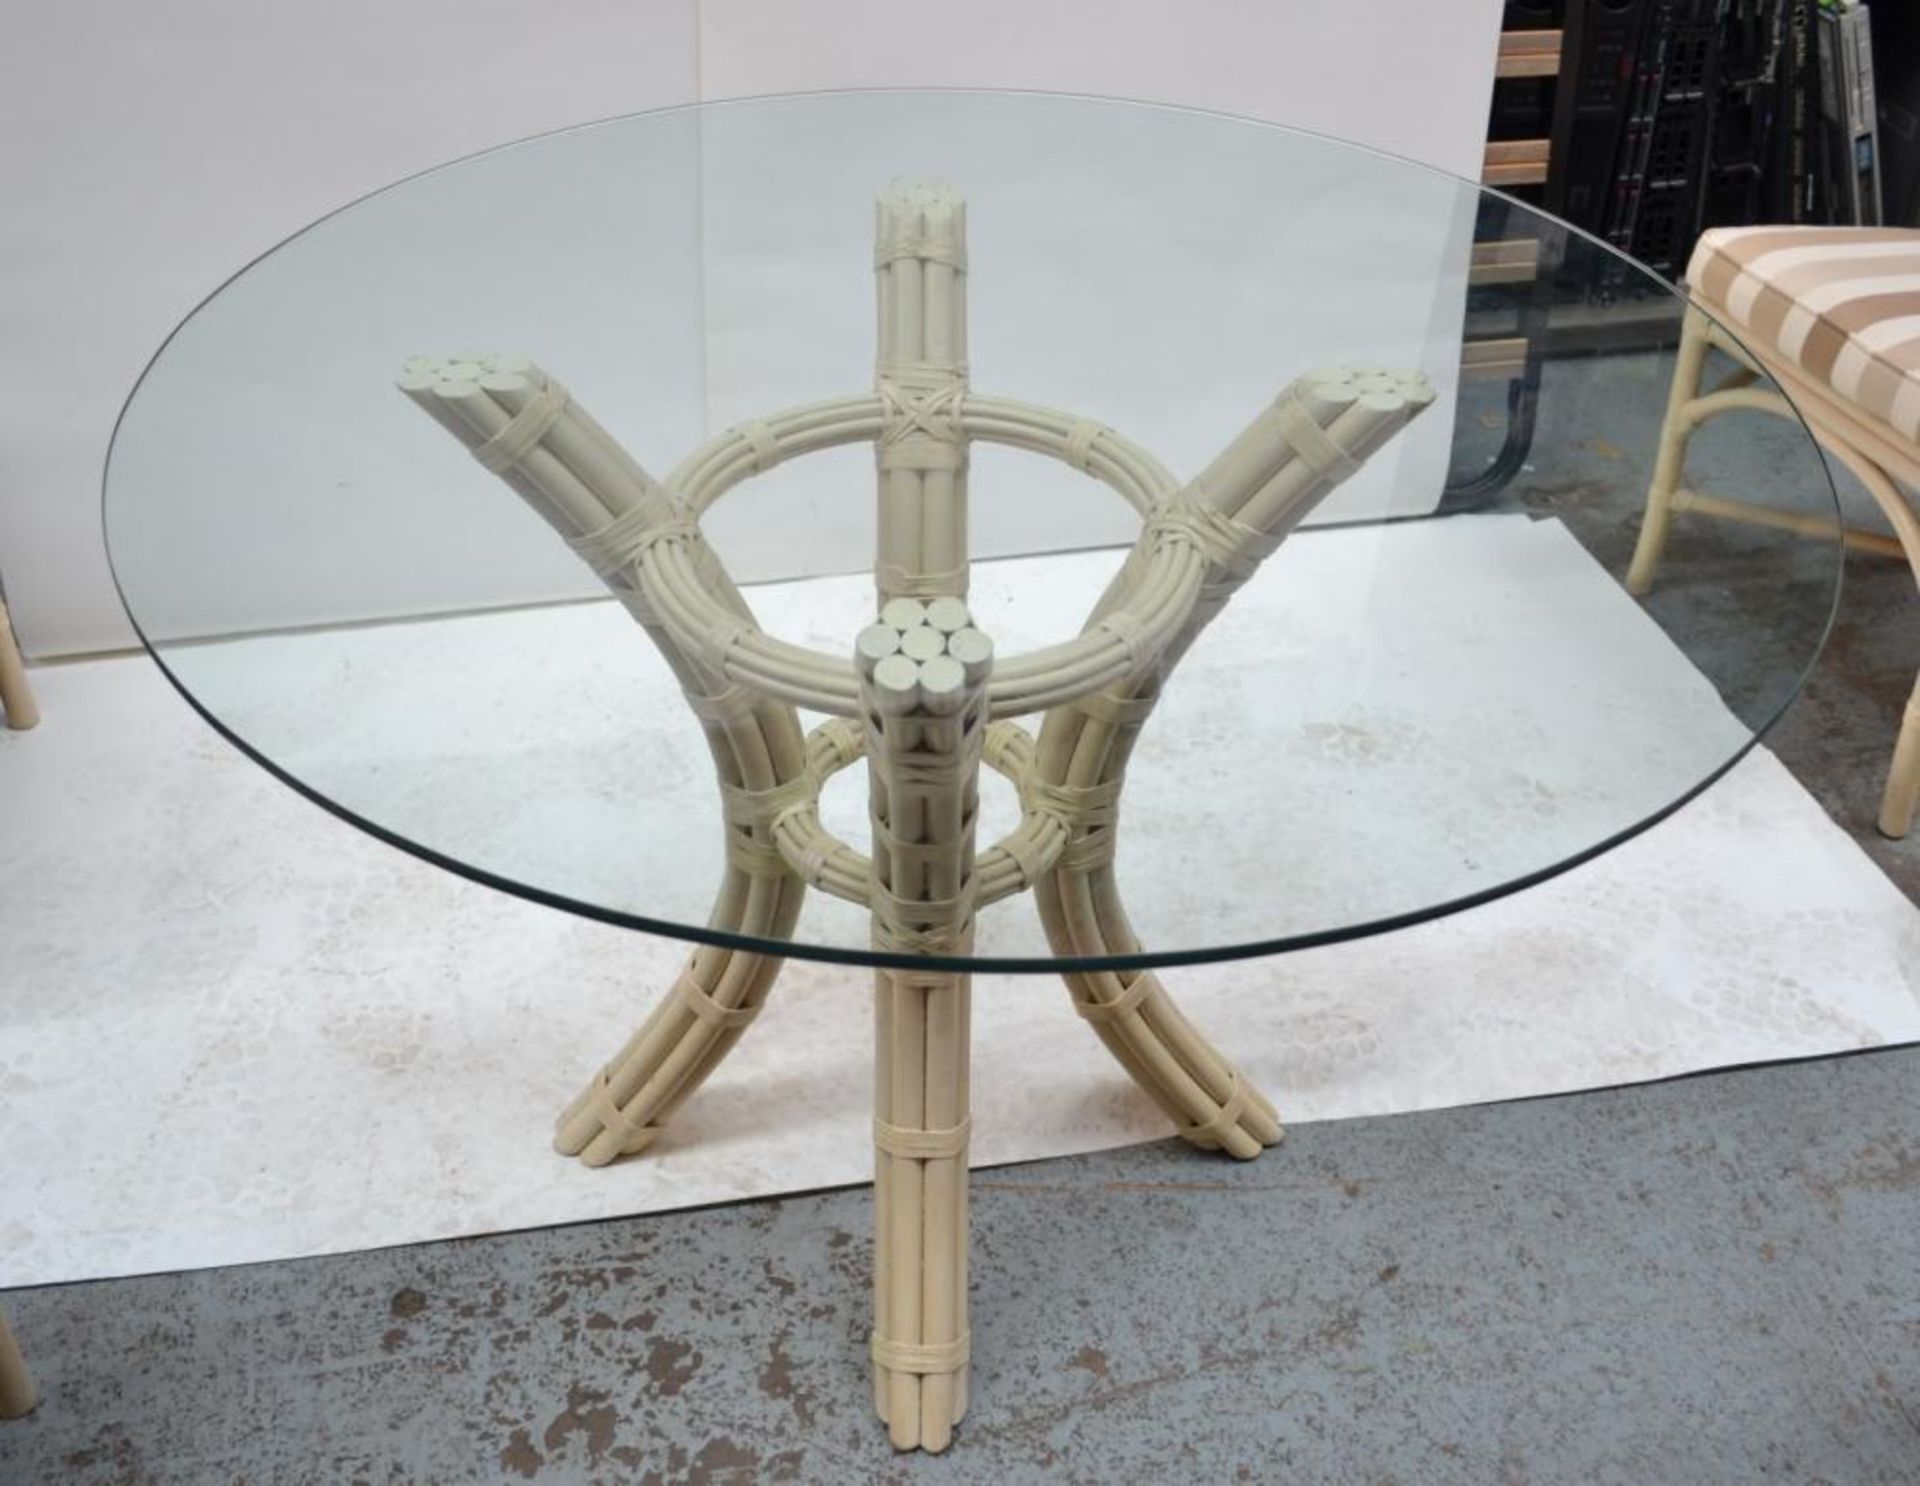 1 x Glass Topped Cane Table with 4 Chairs - Pre-owned In Good Condition - AE010 - CL007 - Location: - Image 12 of 13